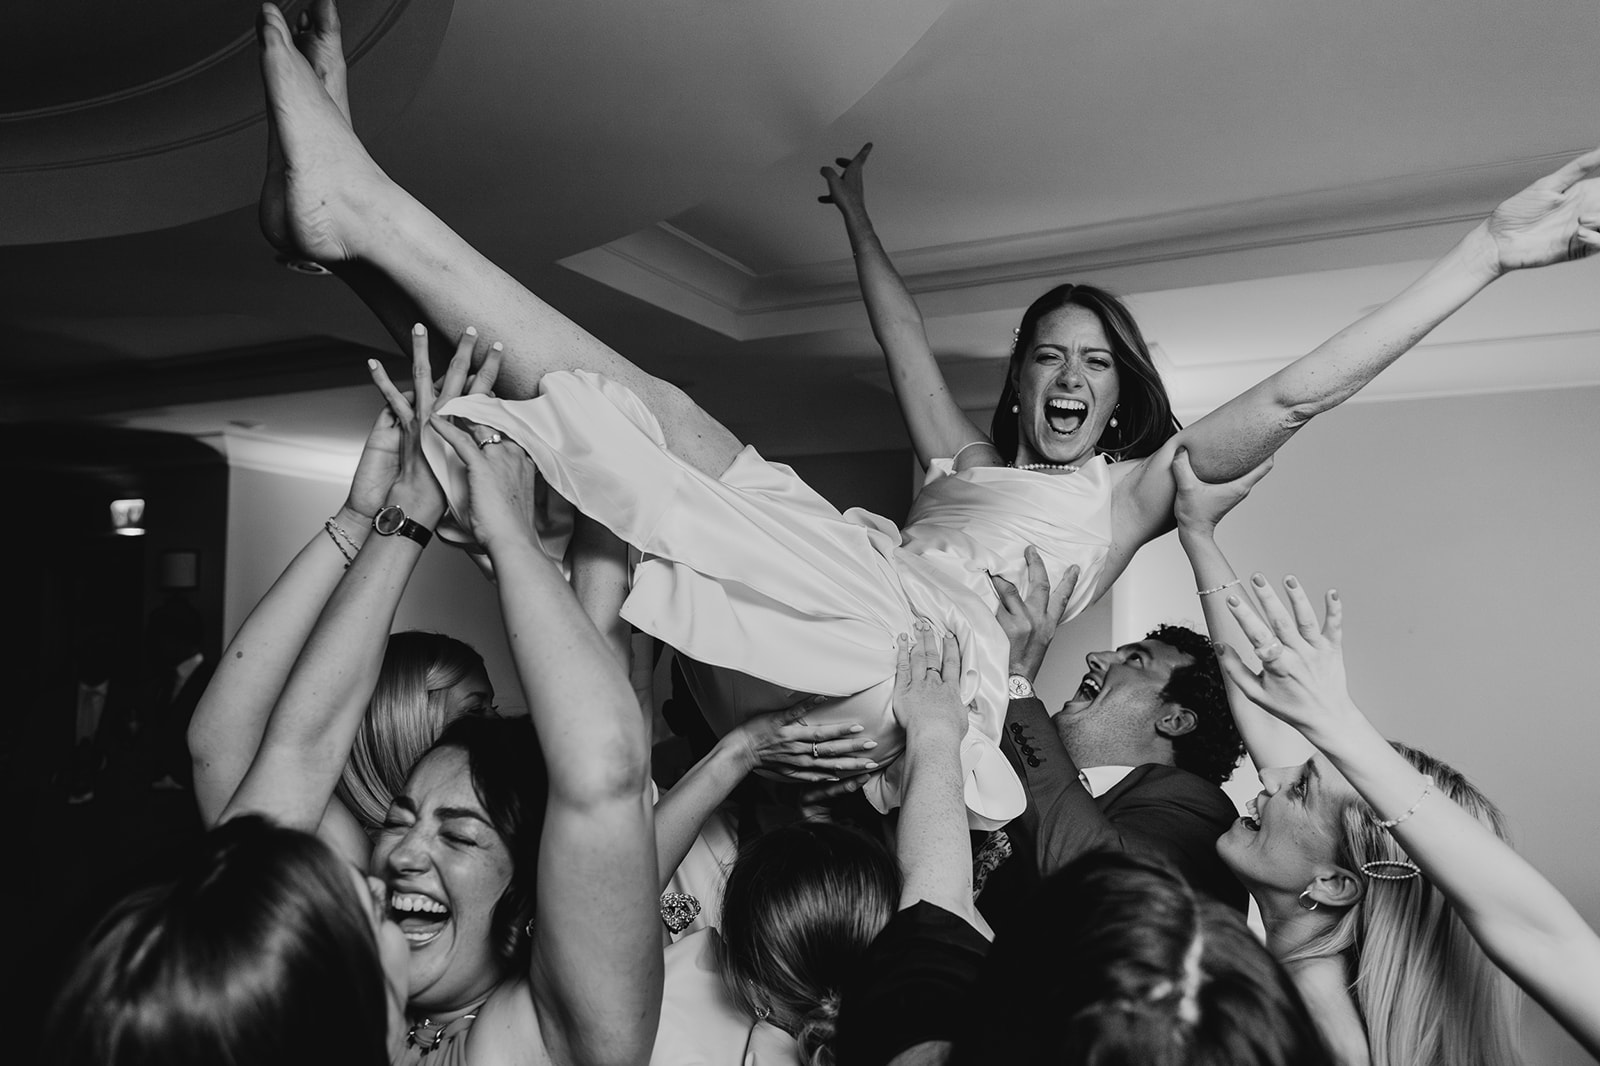 Documentary style wedding image depicts a happy bride being lifted by guests, all smiling and celebrating at a joyous re